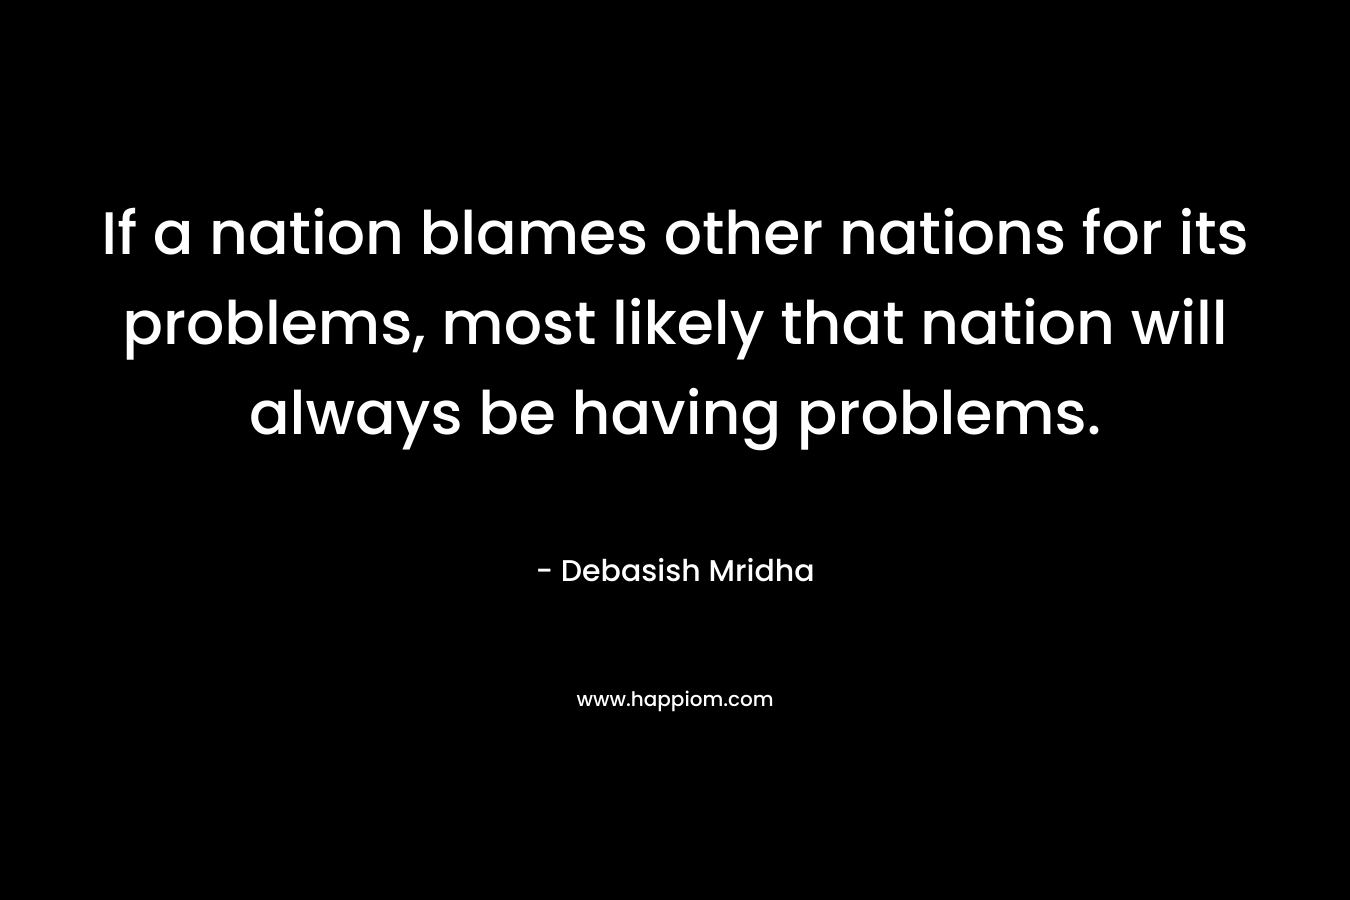 If a nation blames other nations for its problems, most likely that nation will always be having problems.